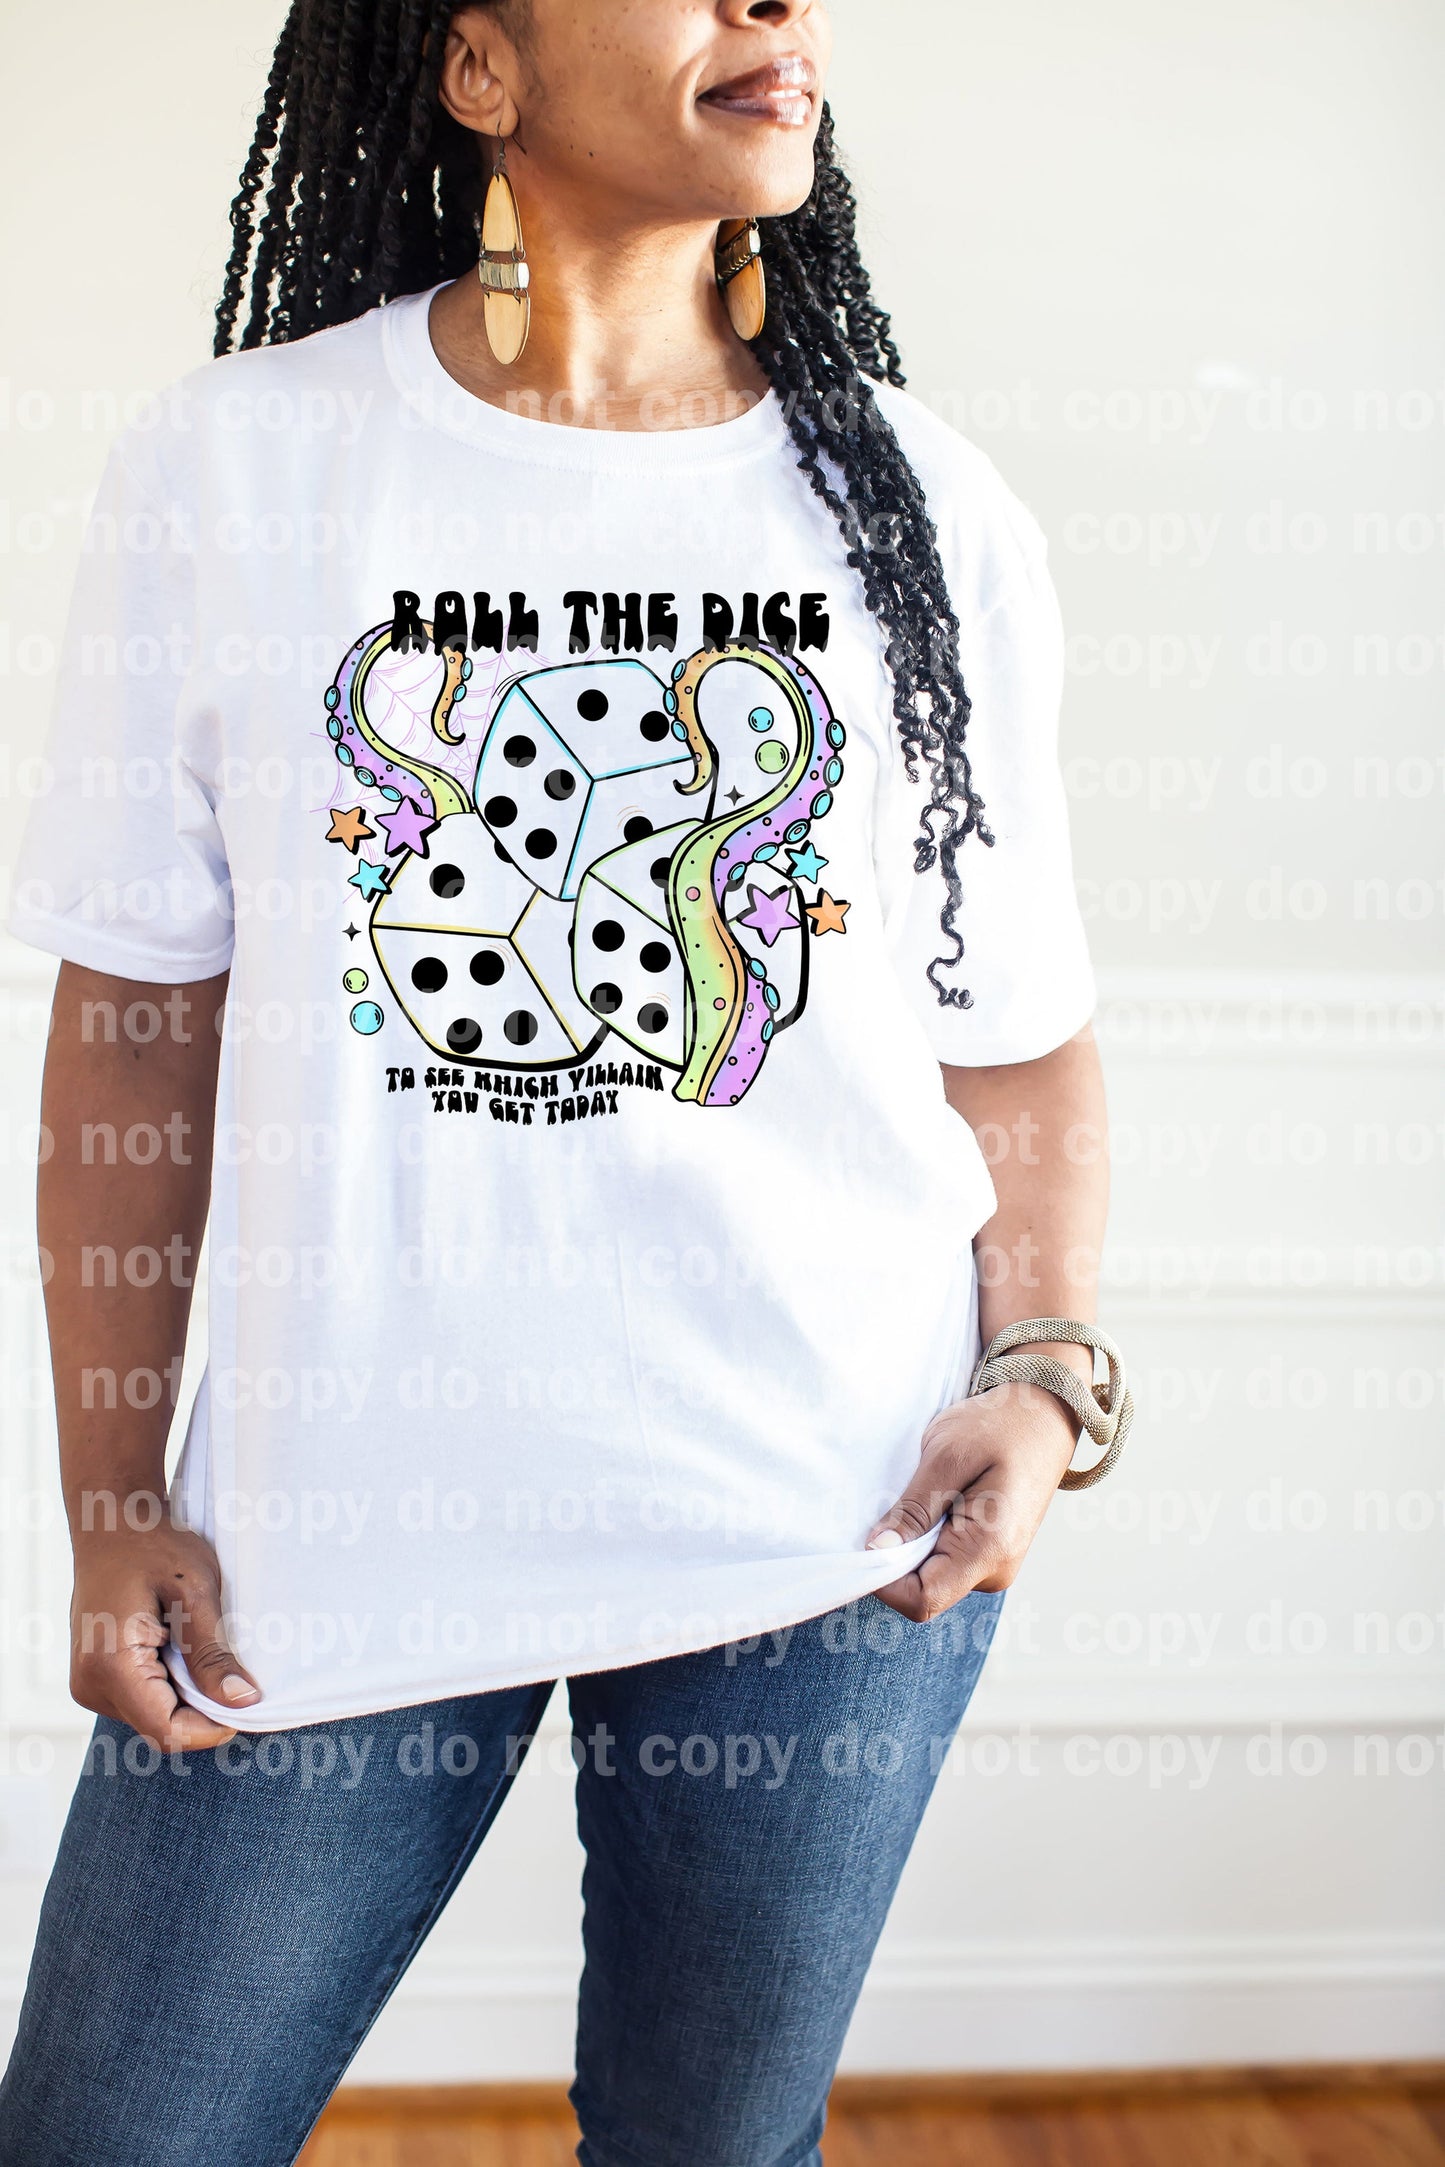 Roll The Dice Dream Print or Sublimation Print